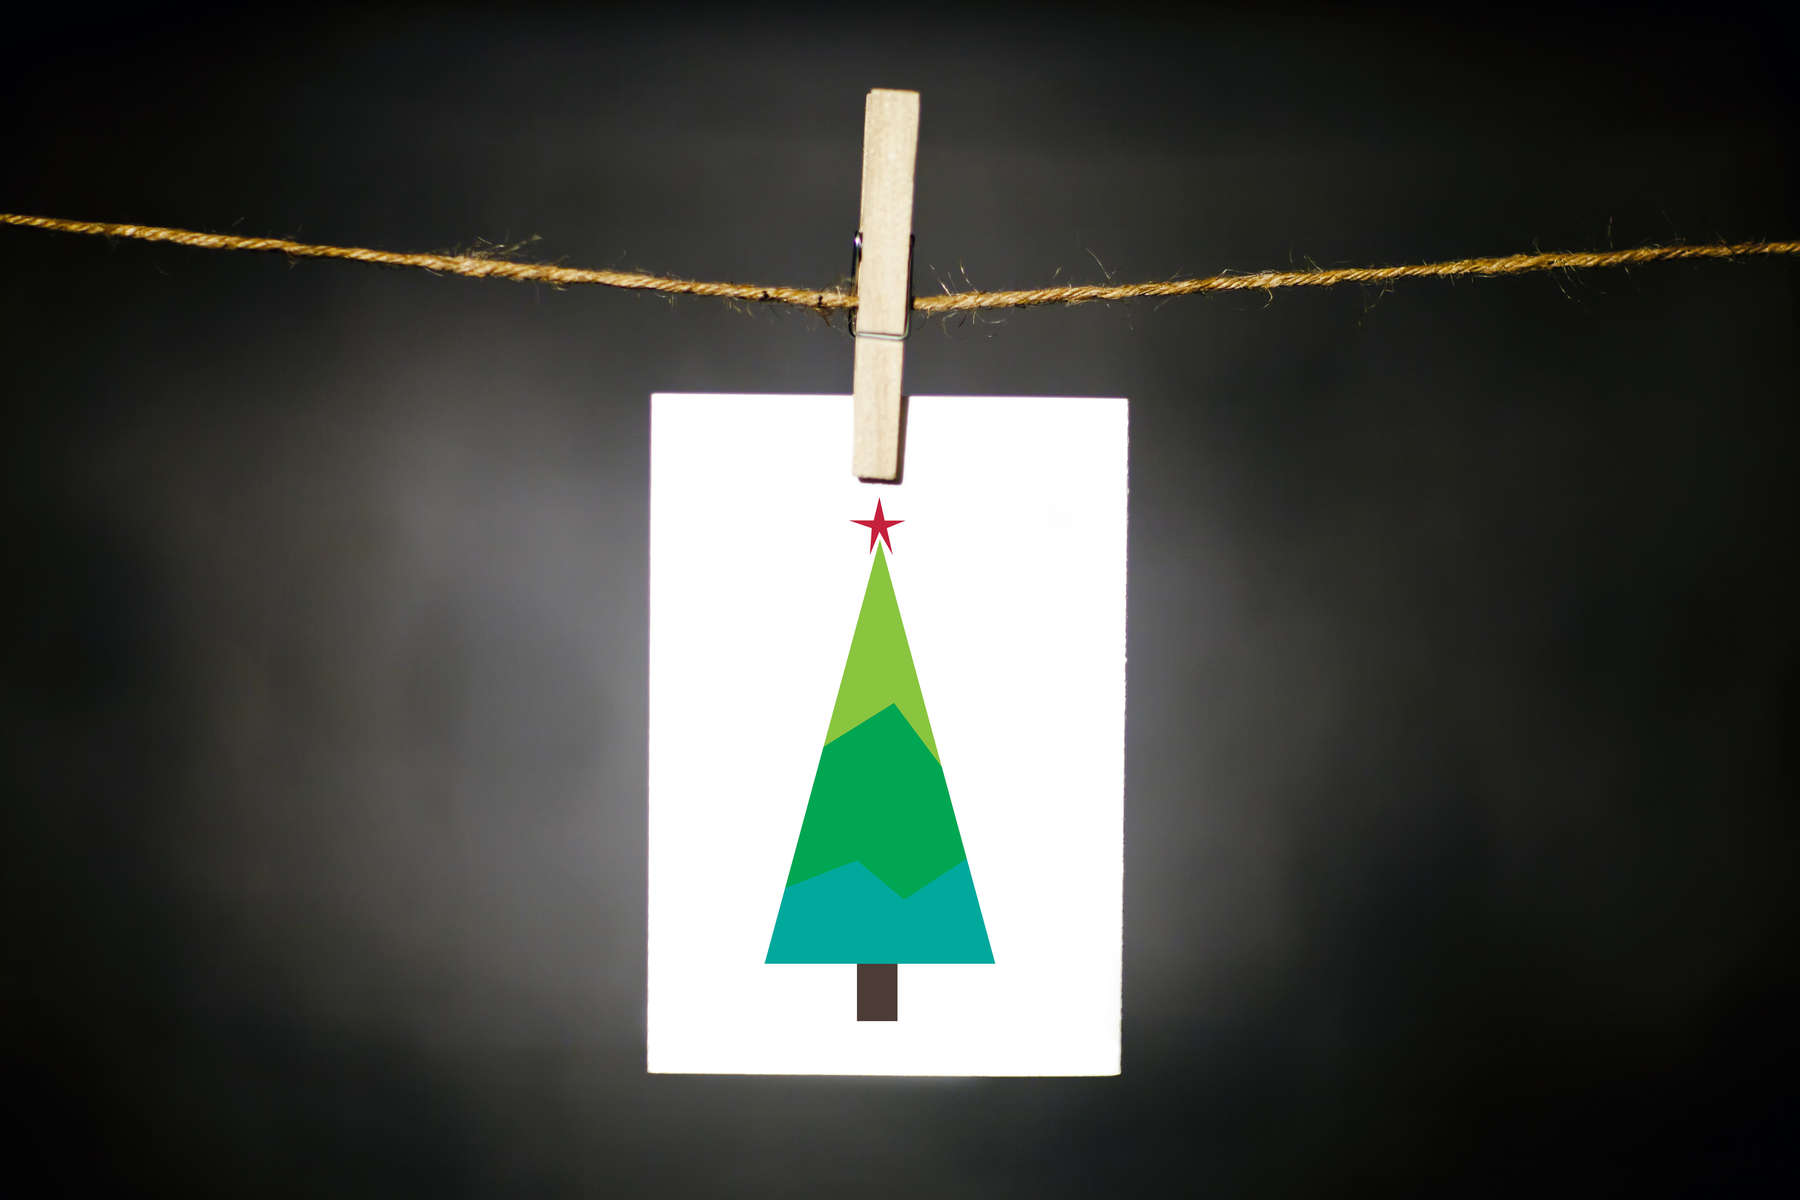 pURCHASE hEREthis festive little tree is the perfect way to wish someone a happy holiday season. each card:is printed on 100# recycled + responsibly-sourced paper //measures 3.5{quote} x 5{quote} //is accompanied by a recycled kraft paper 4-bar envelope // professionally printed //individually packaged in sealed cellophane sleeve //crafted + printed in colorado, usa.